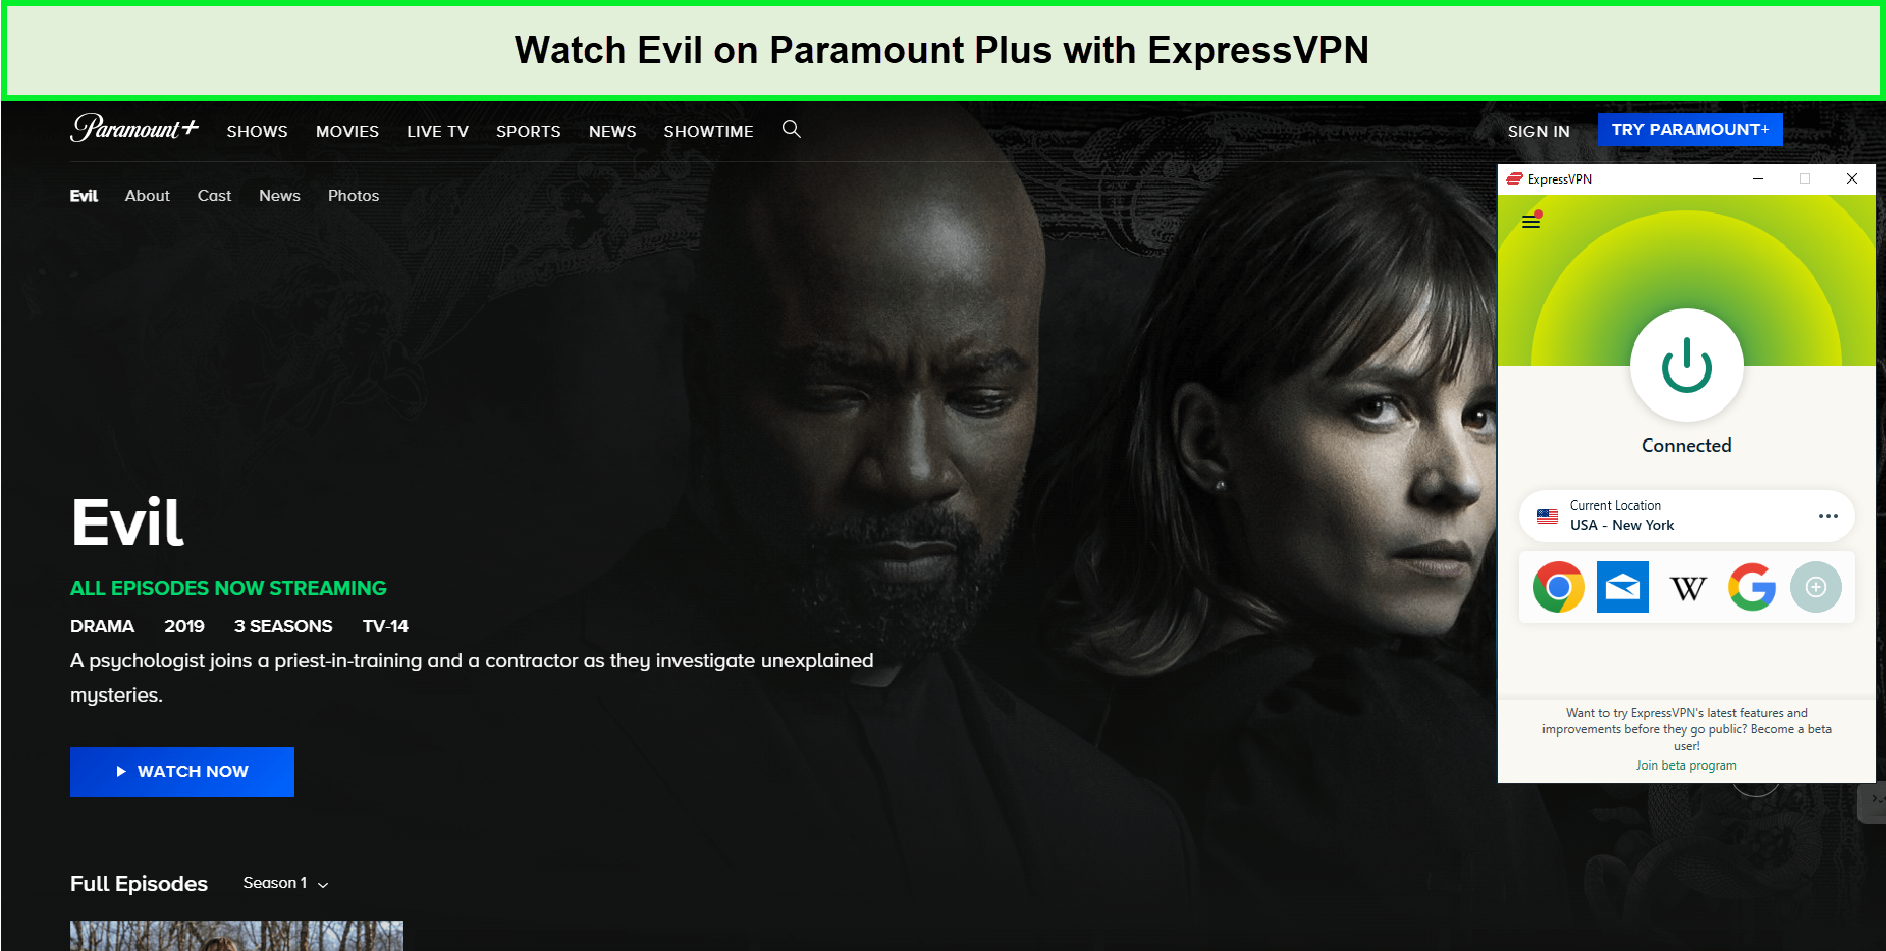 Watch-Evil-All-Seasons-in-Singapore-on-Paramount-Plus-with-ExpressVPN